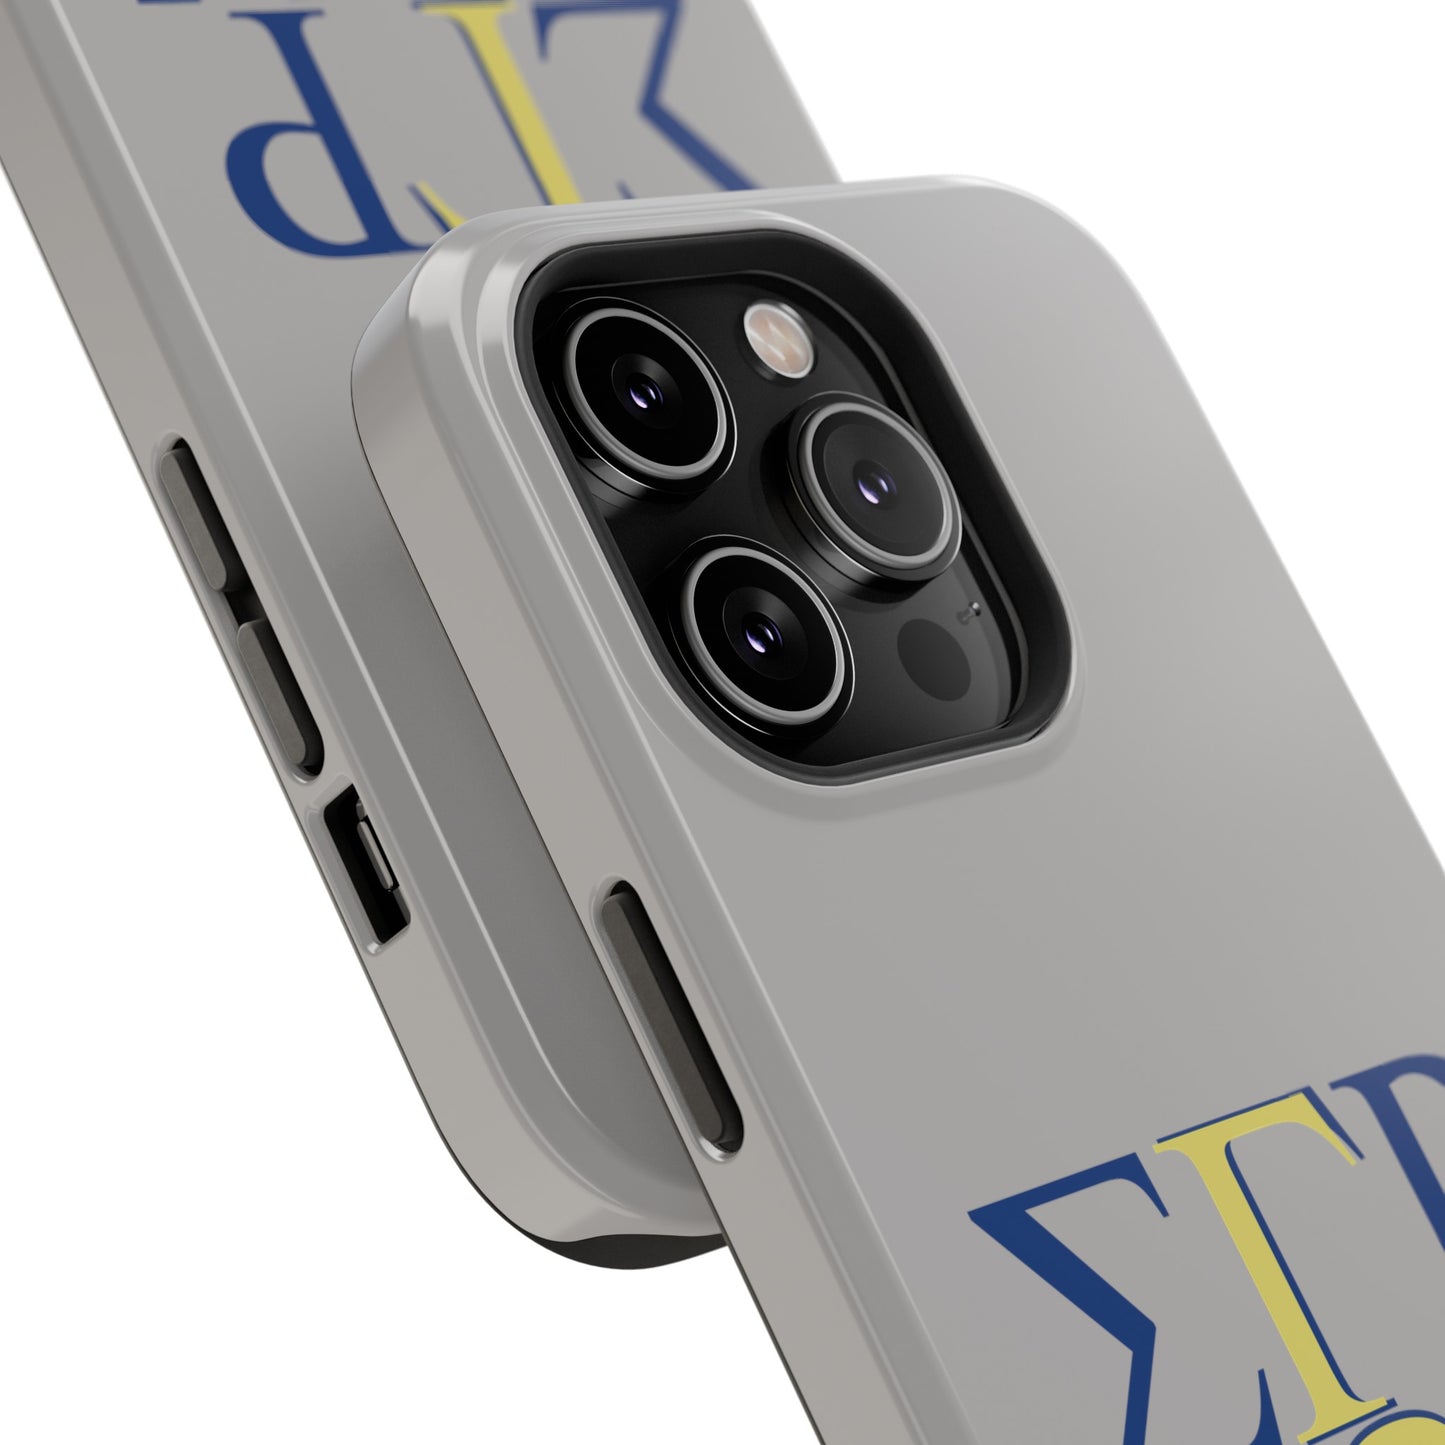 Sigma Gamma Rho Mom Samsung and iPhone Impact-Resistant Cases